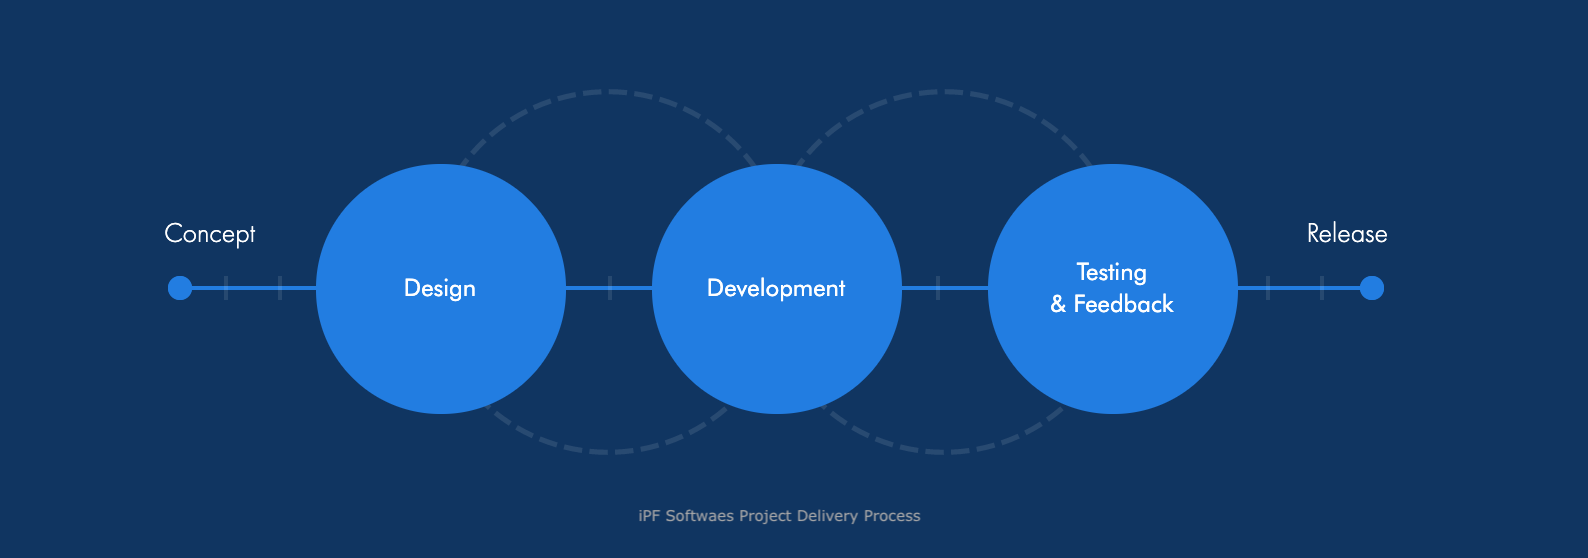 iPF Softwares Project Delivery Process